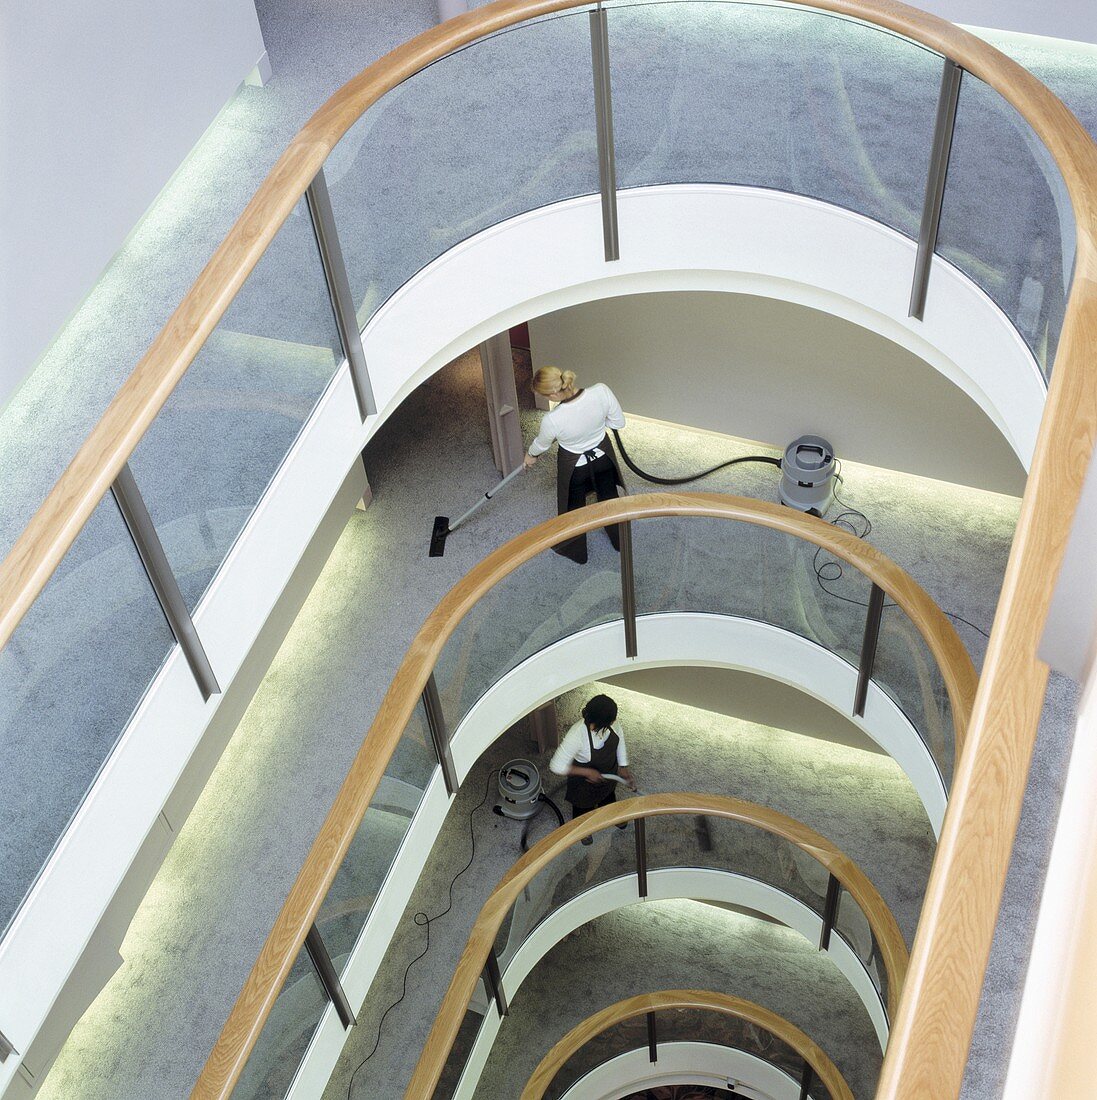 Cleaners in a carpeted lightwell with glass balustrades